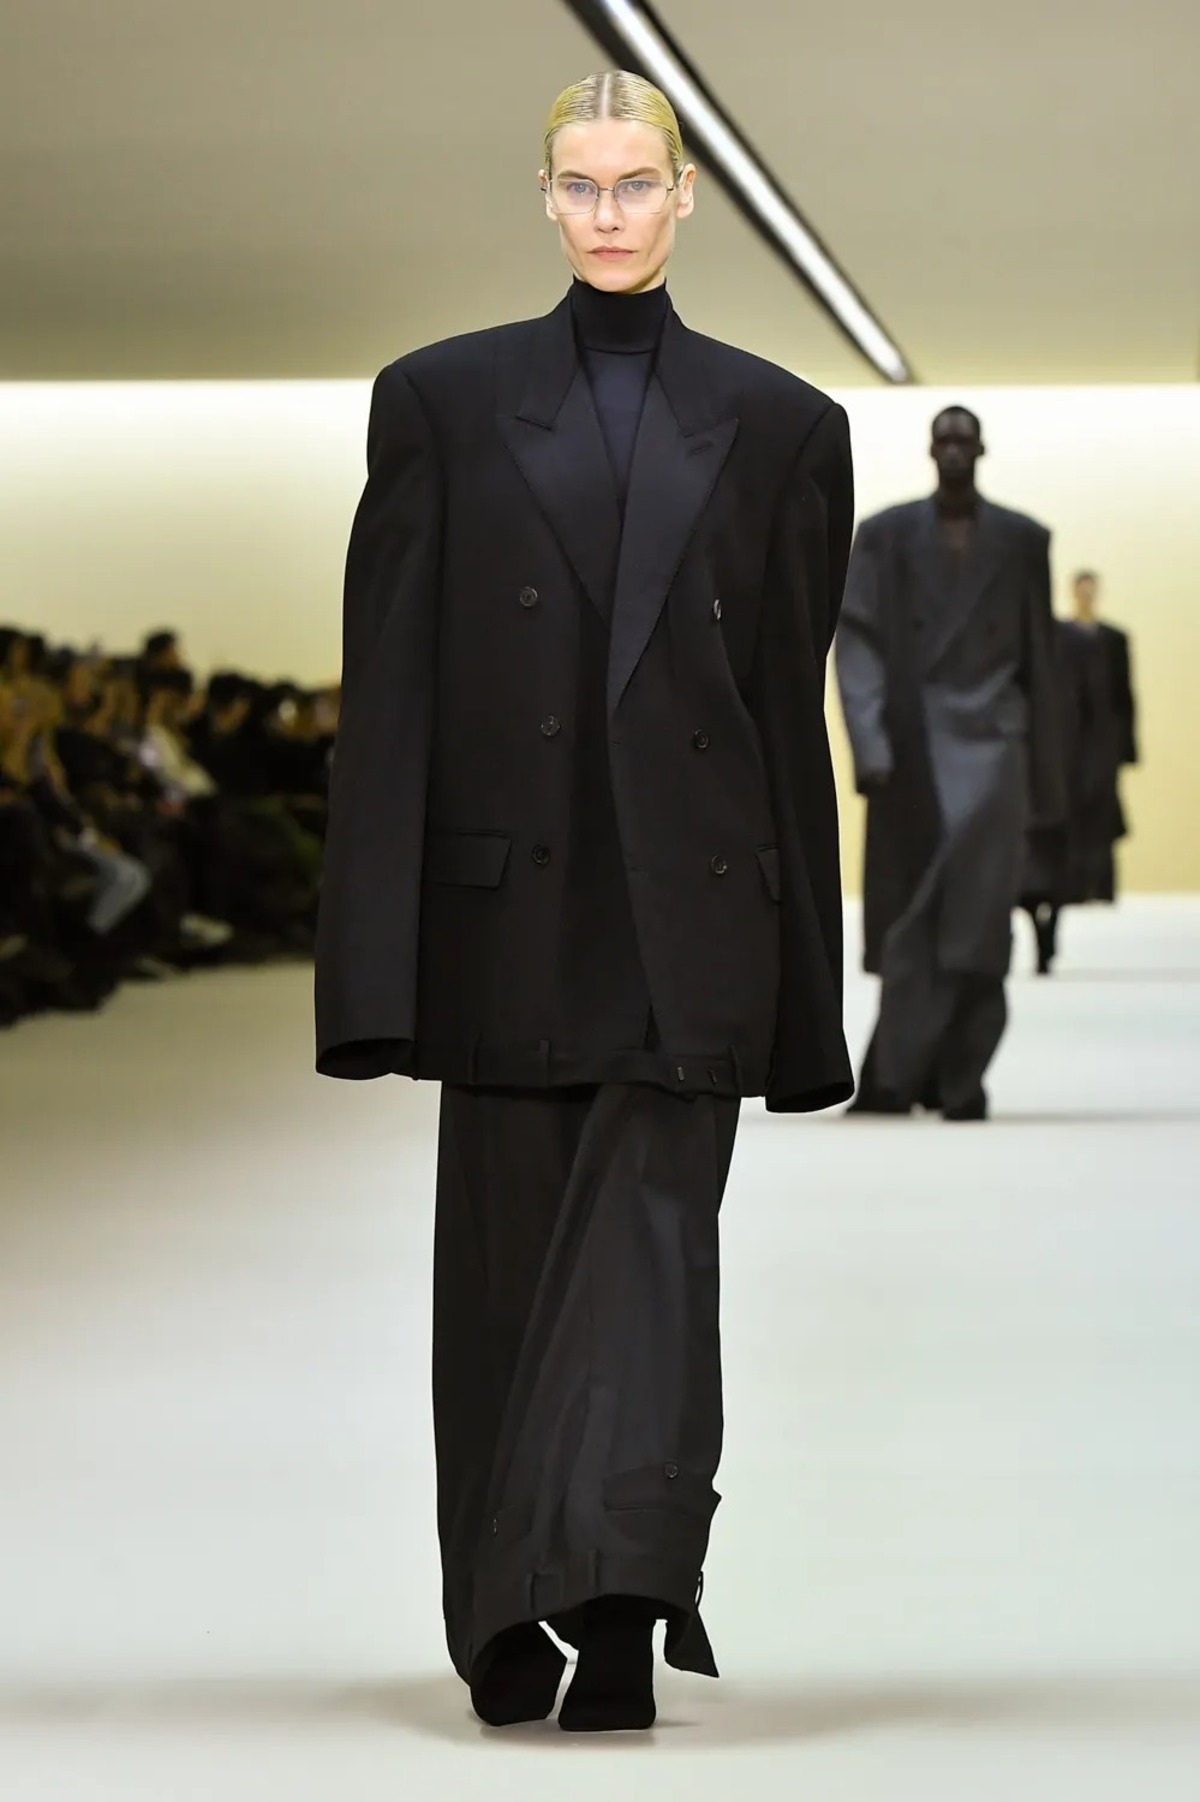 Paris Fashion Week Review Balenciaga Offers Just Clothes and Contrition   The New York Times